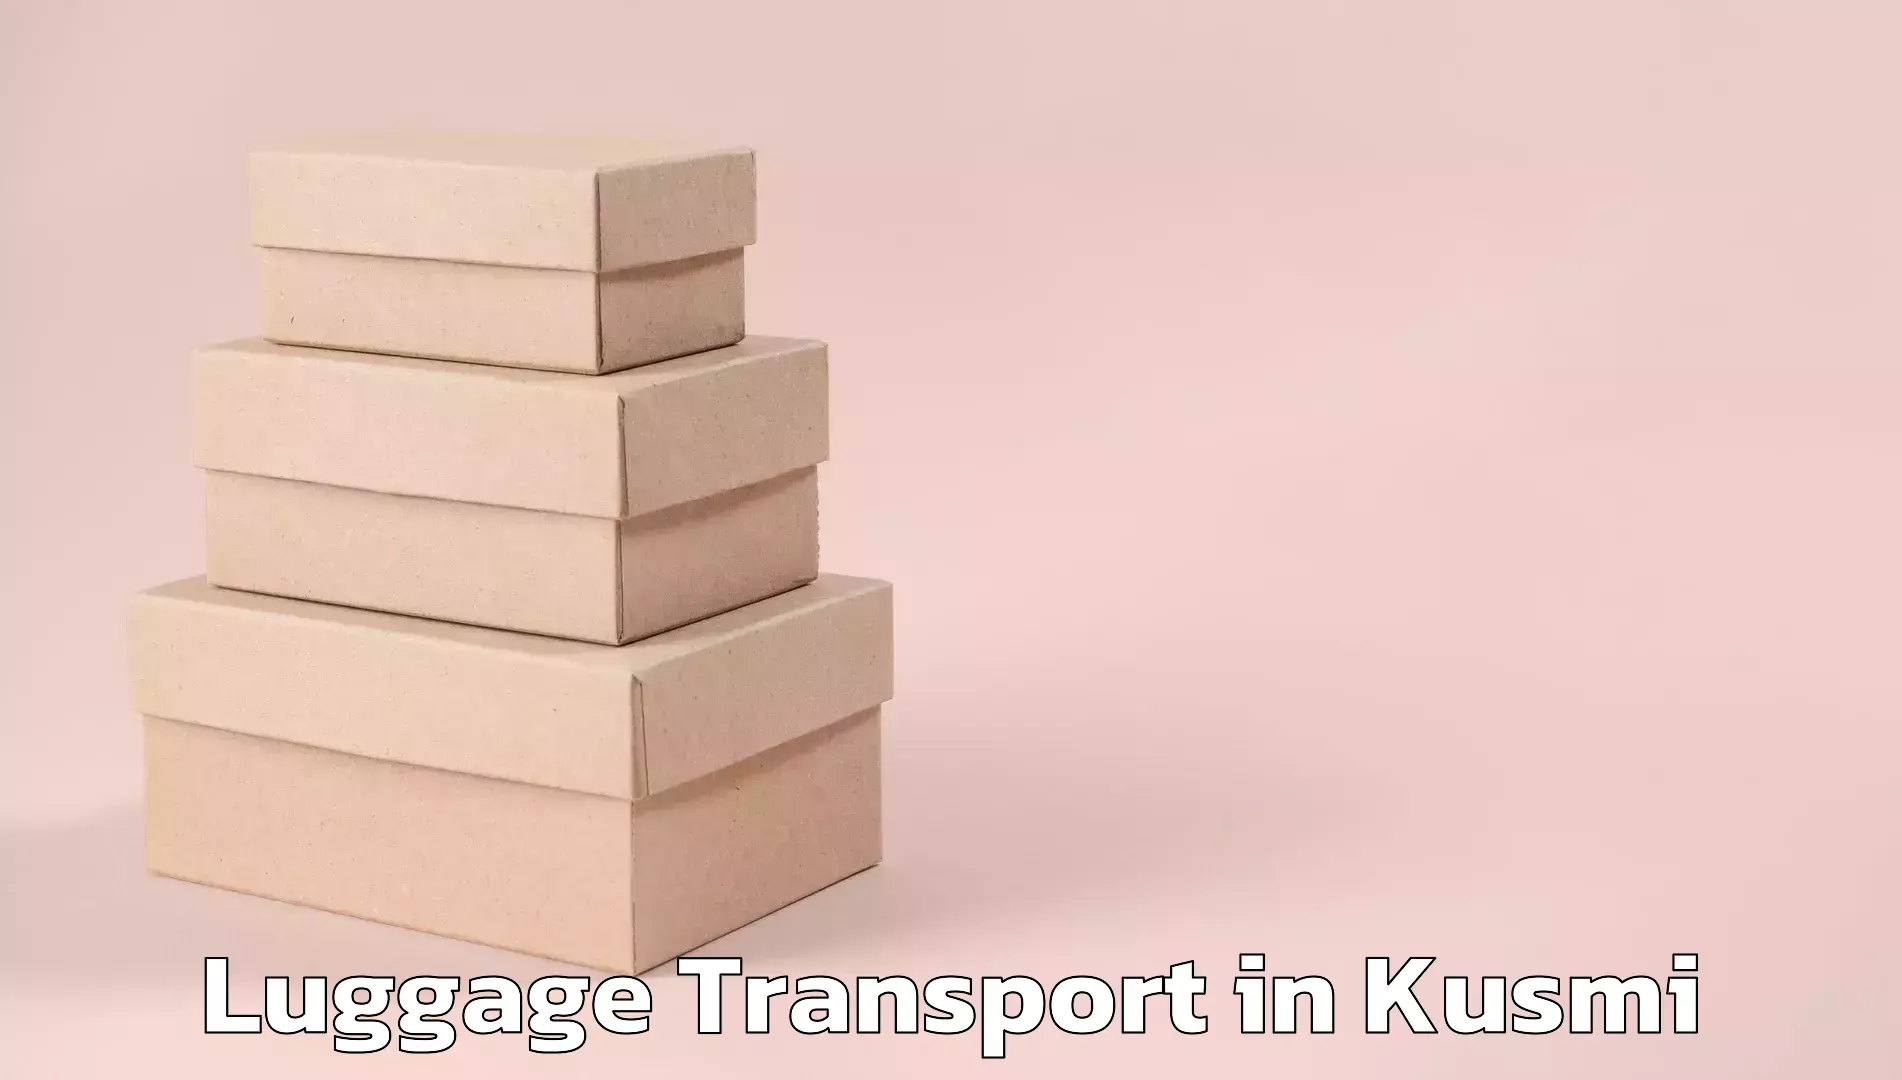 Luggage transport consulting in Kusmi